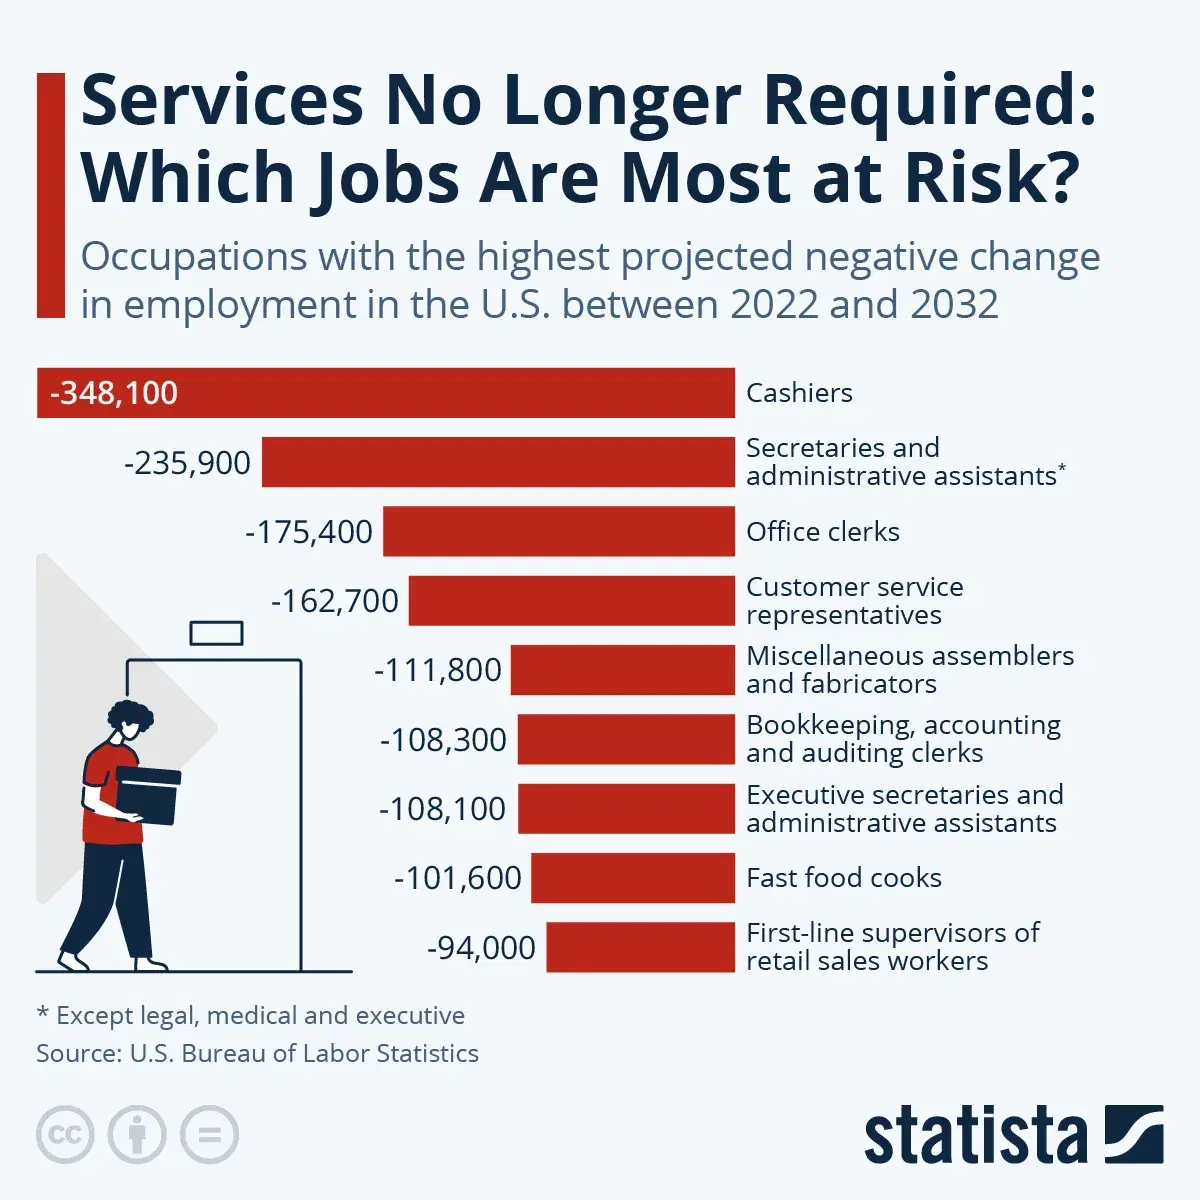 Services No Longer Required: Which Jobs Are Most at Risk?